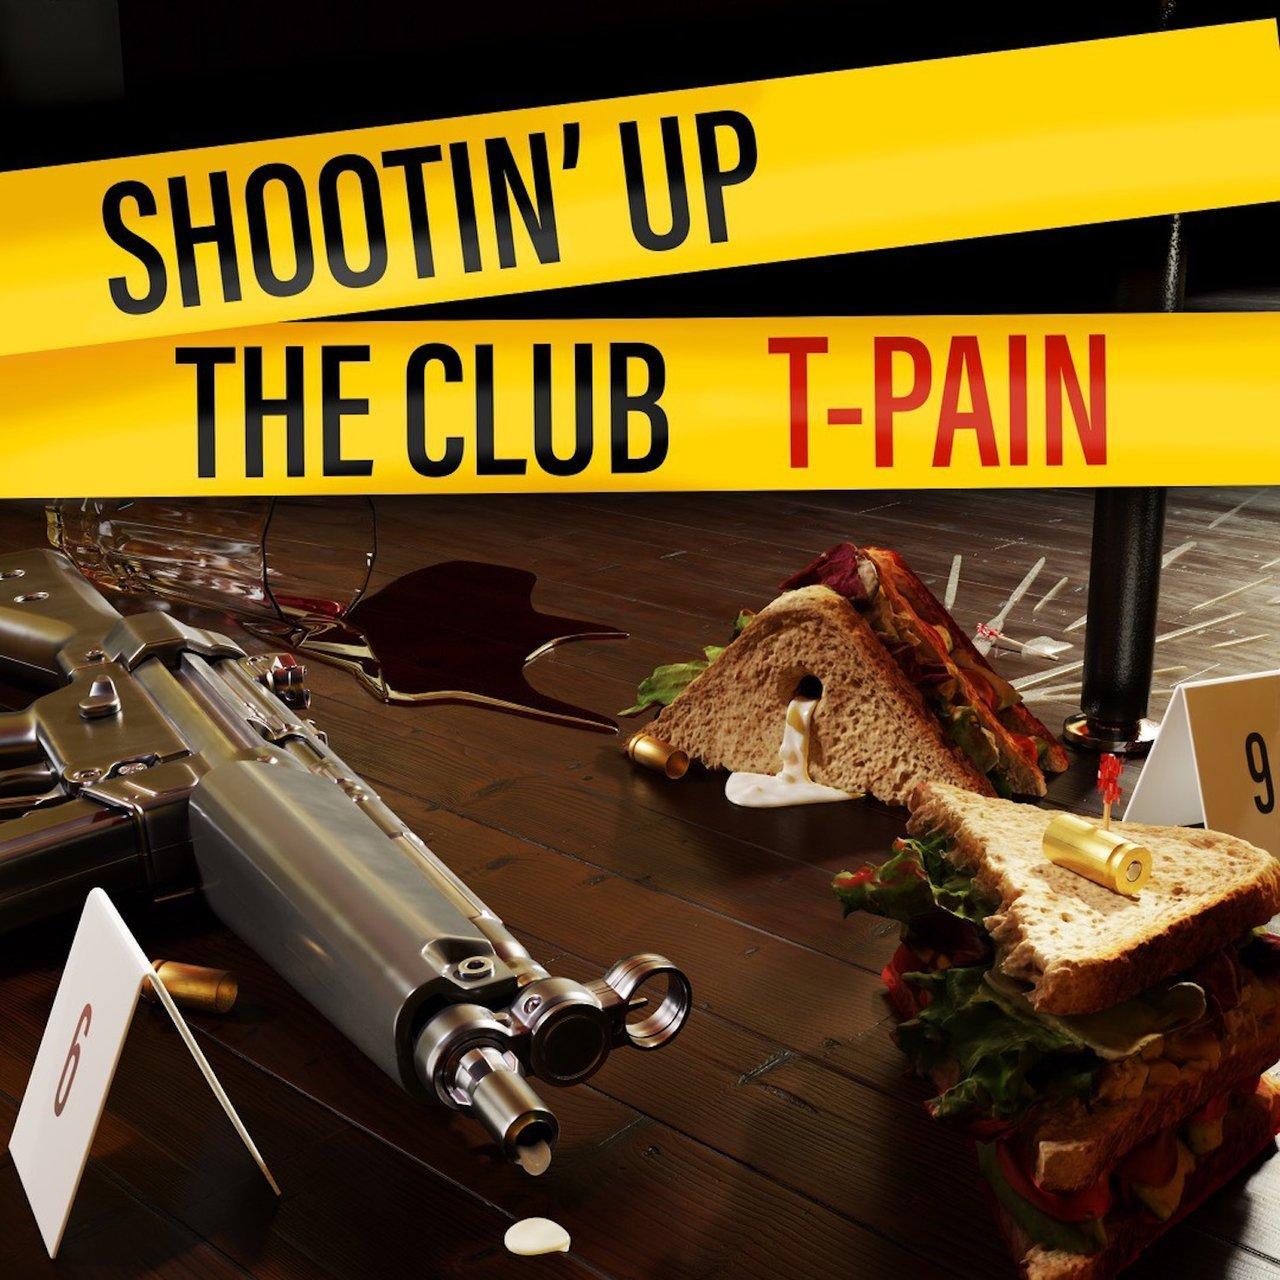 T-Pain ‘Shooting Up The Club’ Song